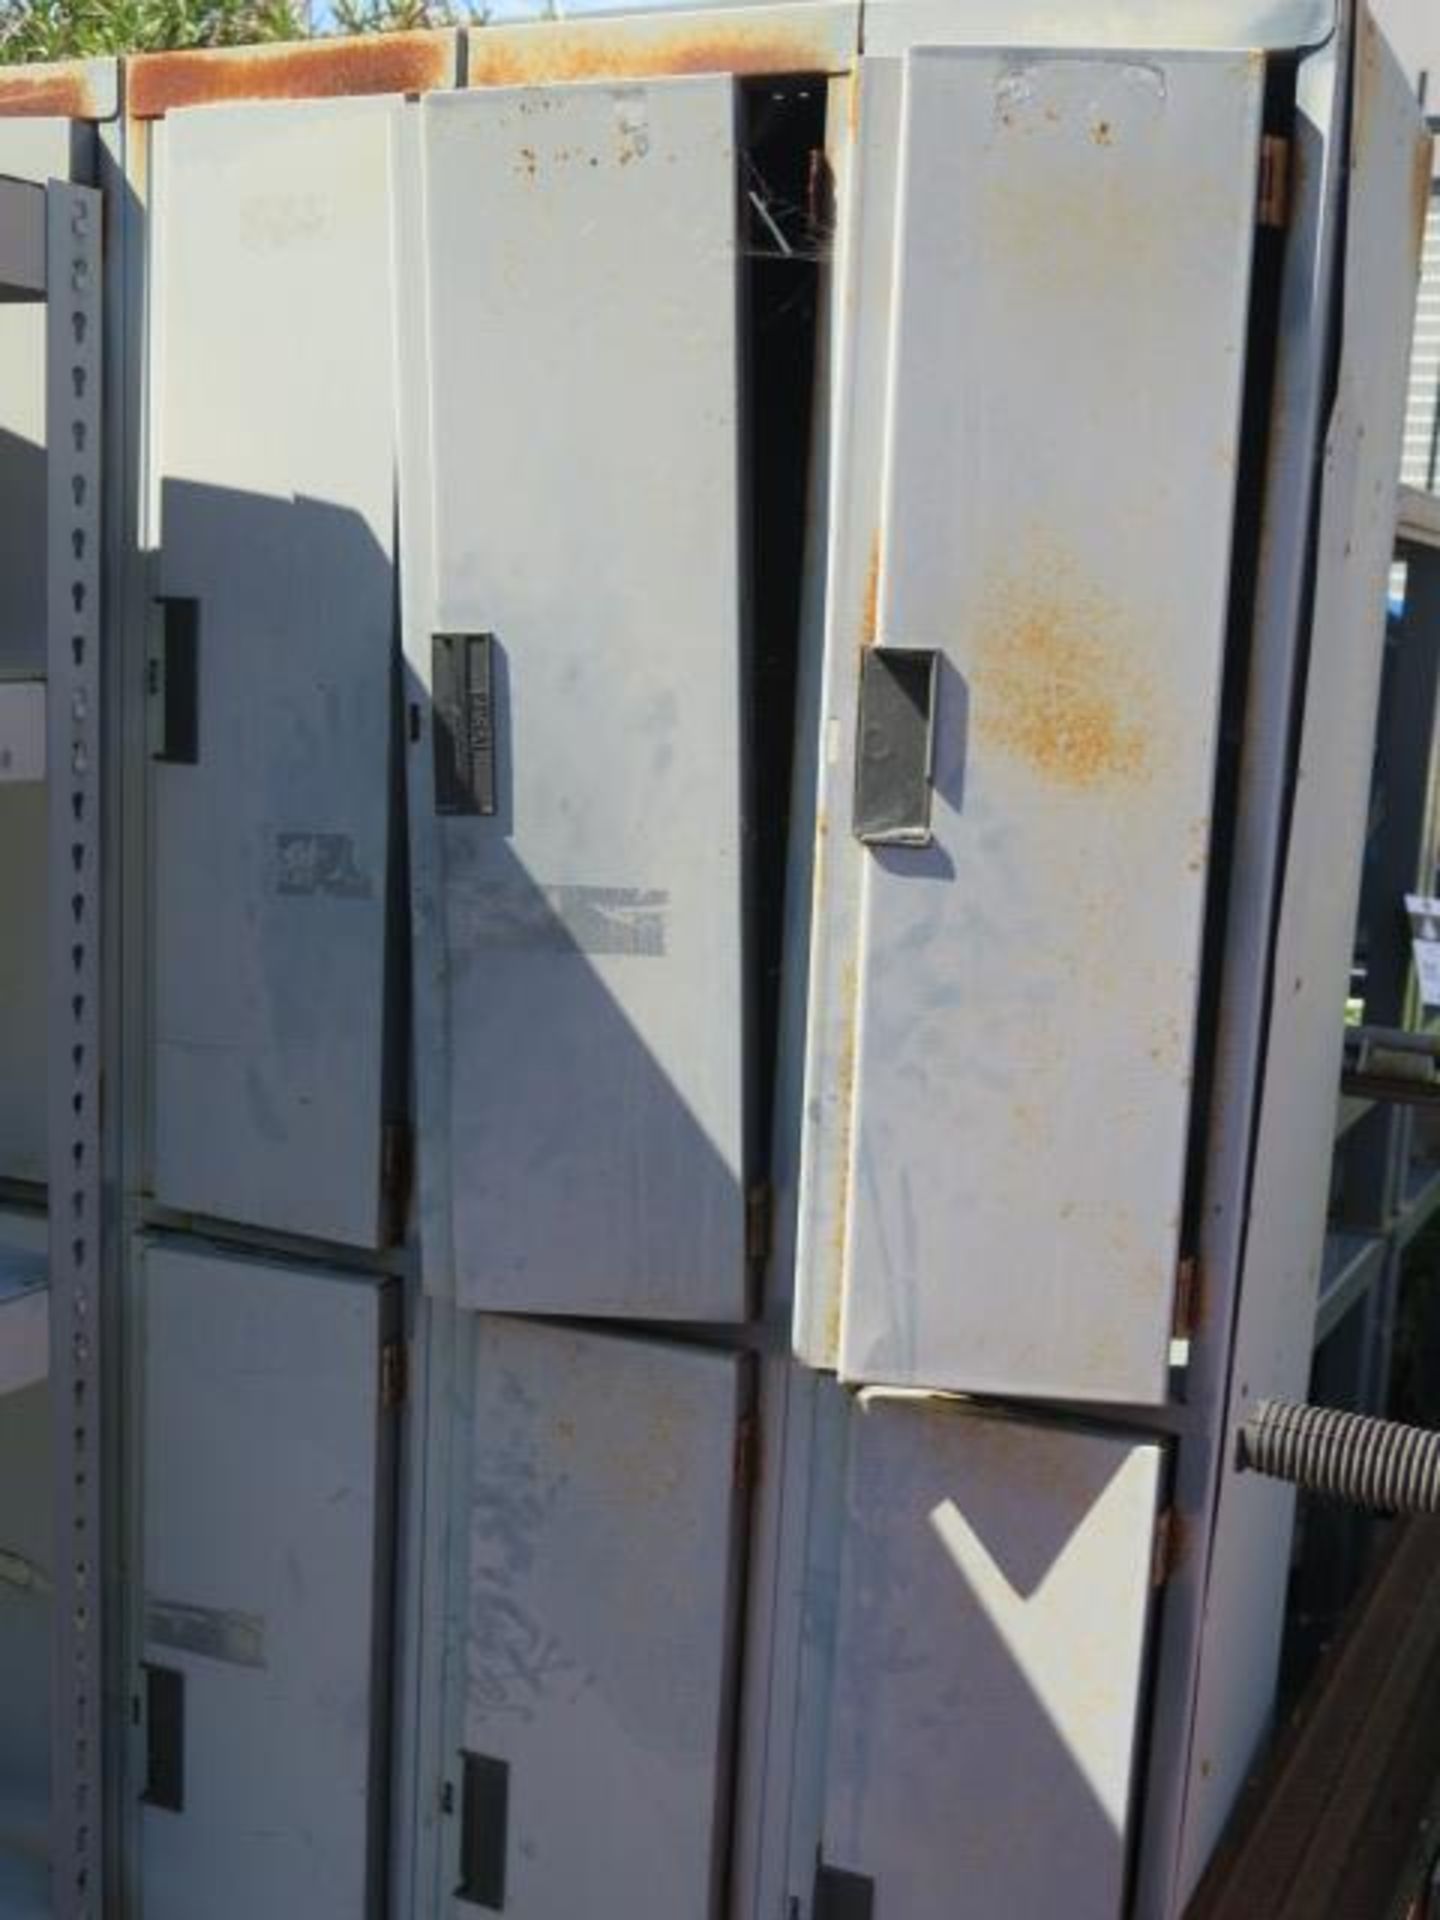 Employee Lockers, Storage Cabinet and Shelf (SOLD AS-IS - NO WARRANTY) (Located at 2091 Fortune Dr., - Bild 7 aus 7